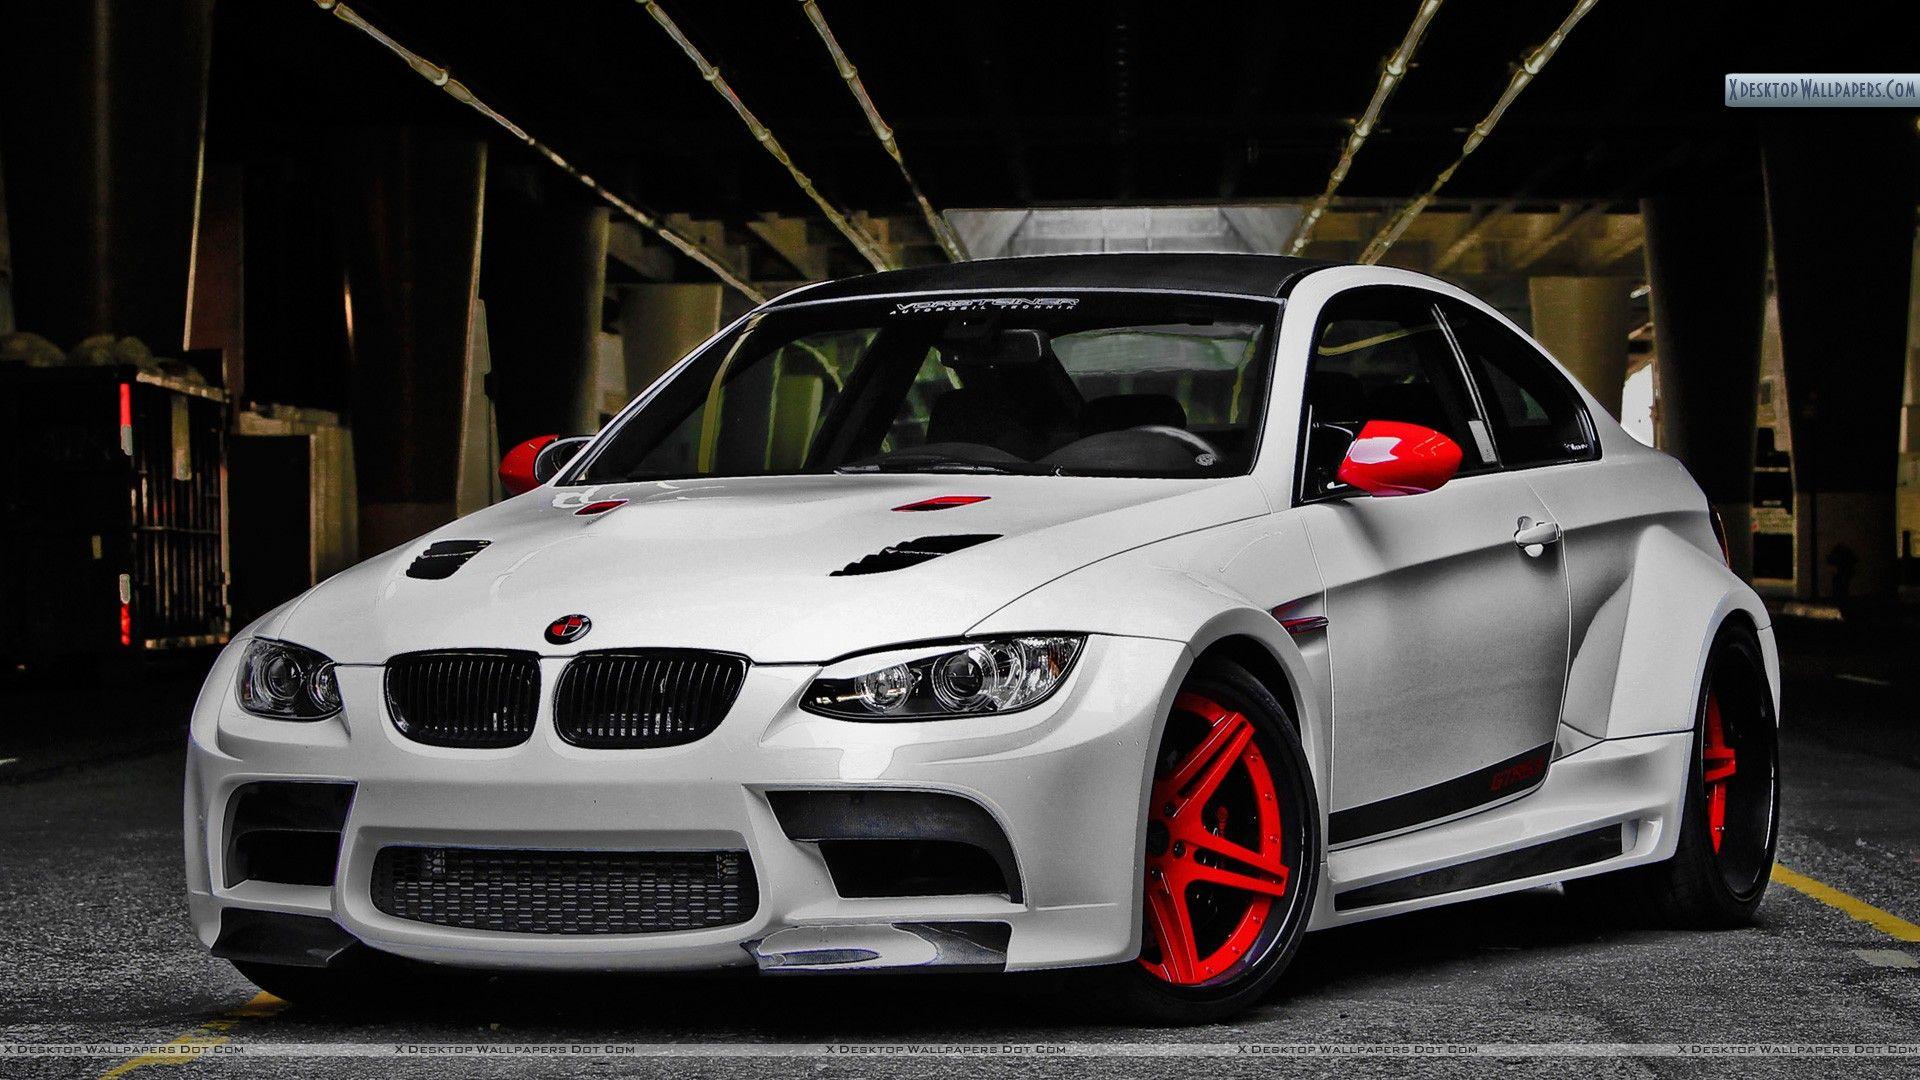 BMW M3 Wallpaper, Photo & Image in HD